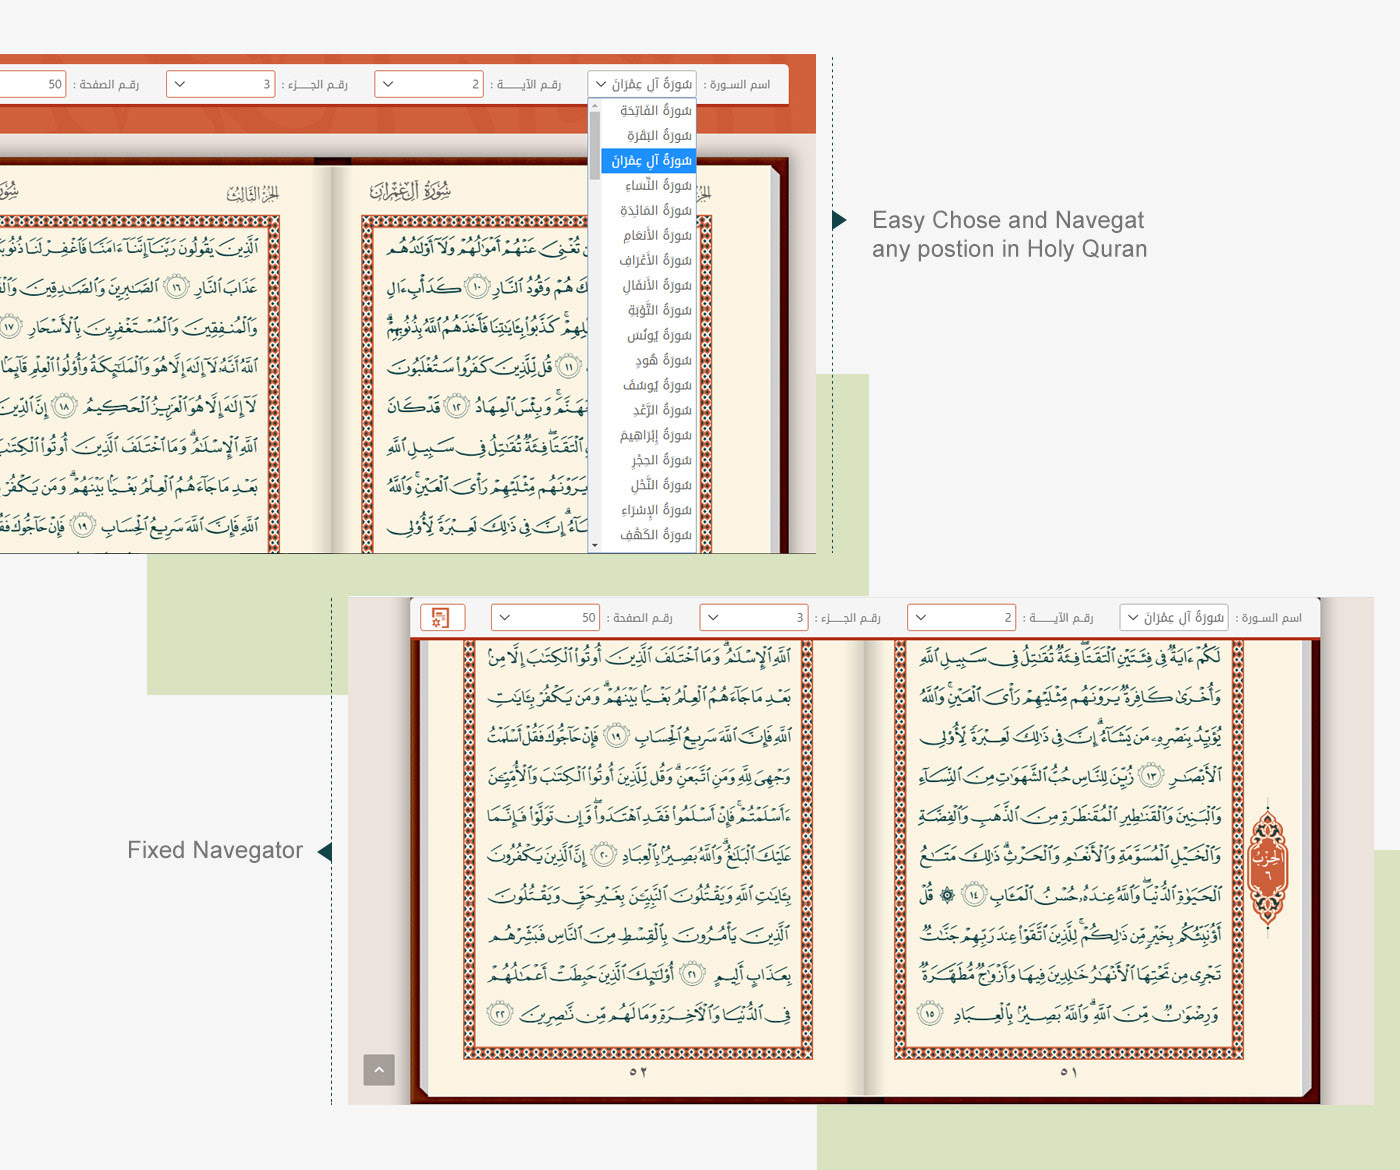 front_end holy quran landingpage prototype redesign ui ux Website wireframes interaction Responsive